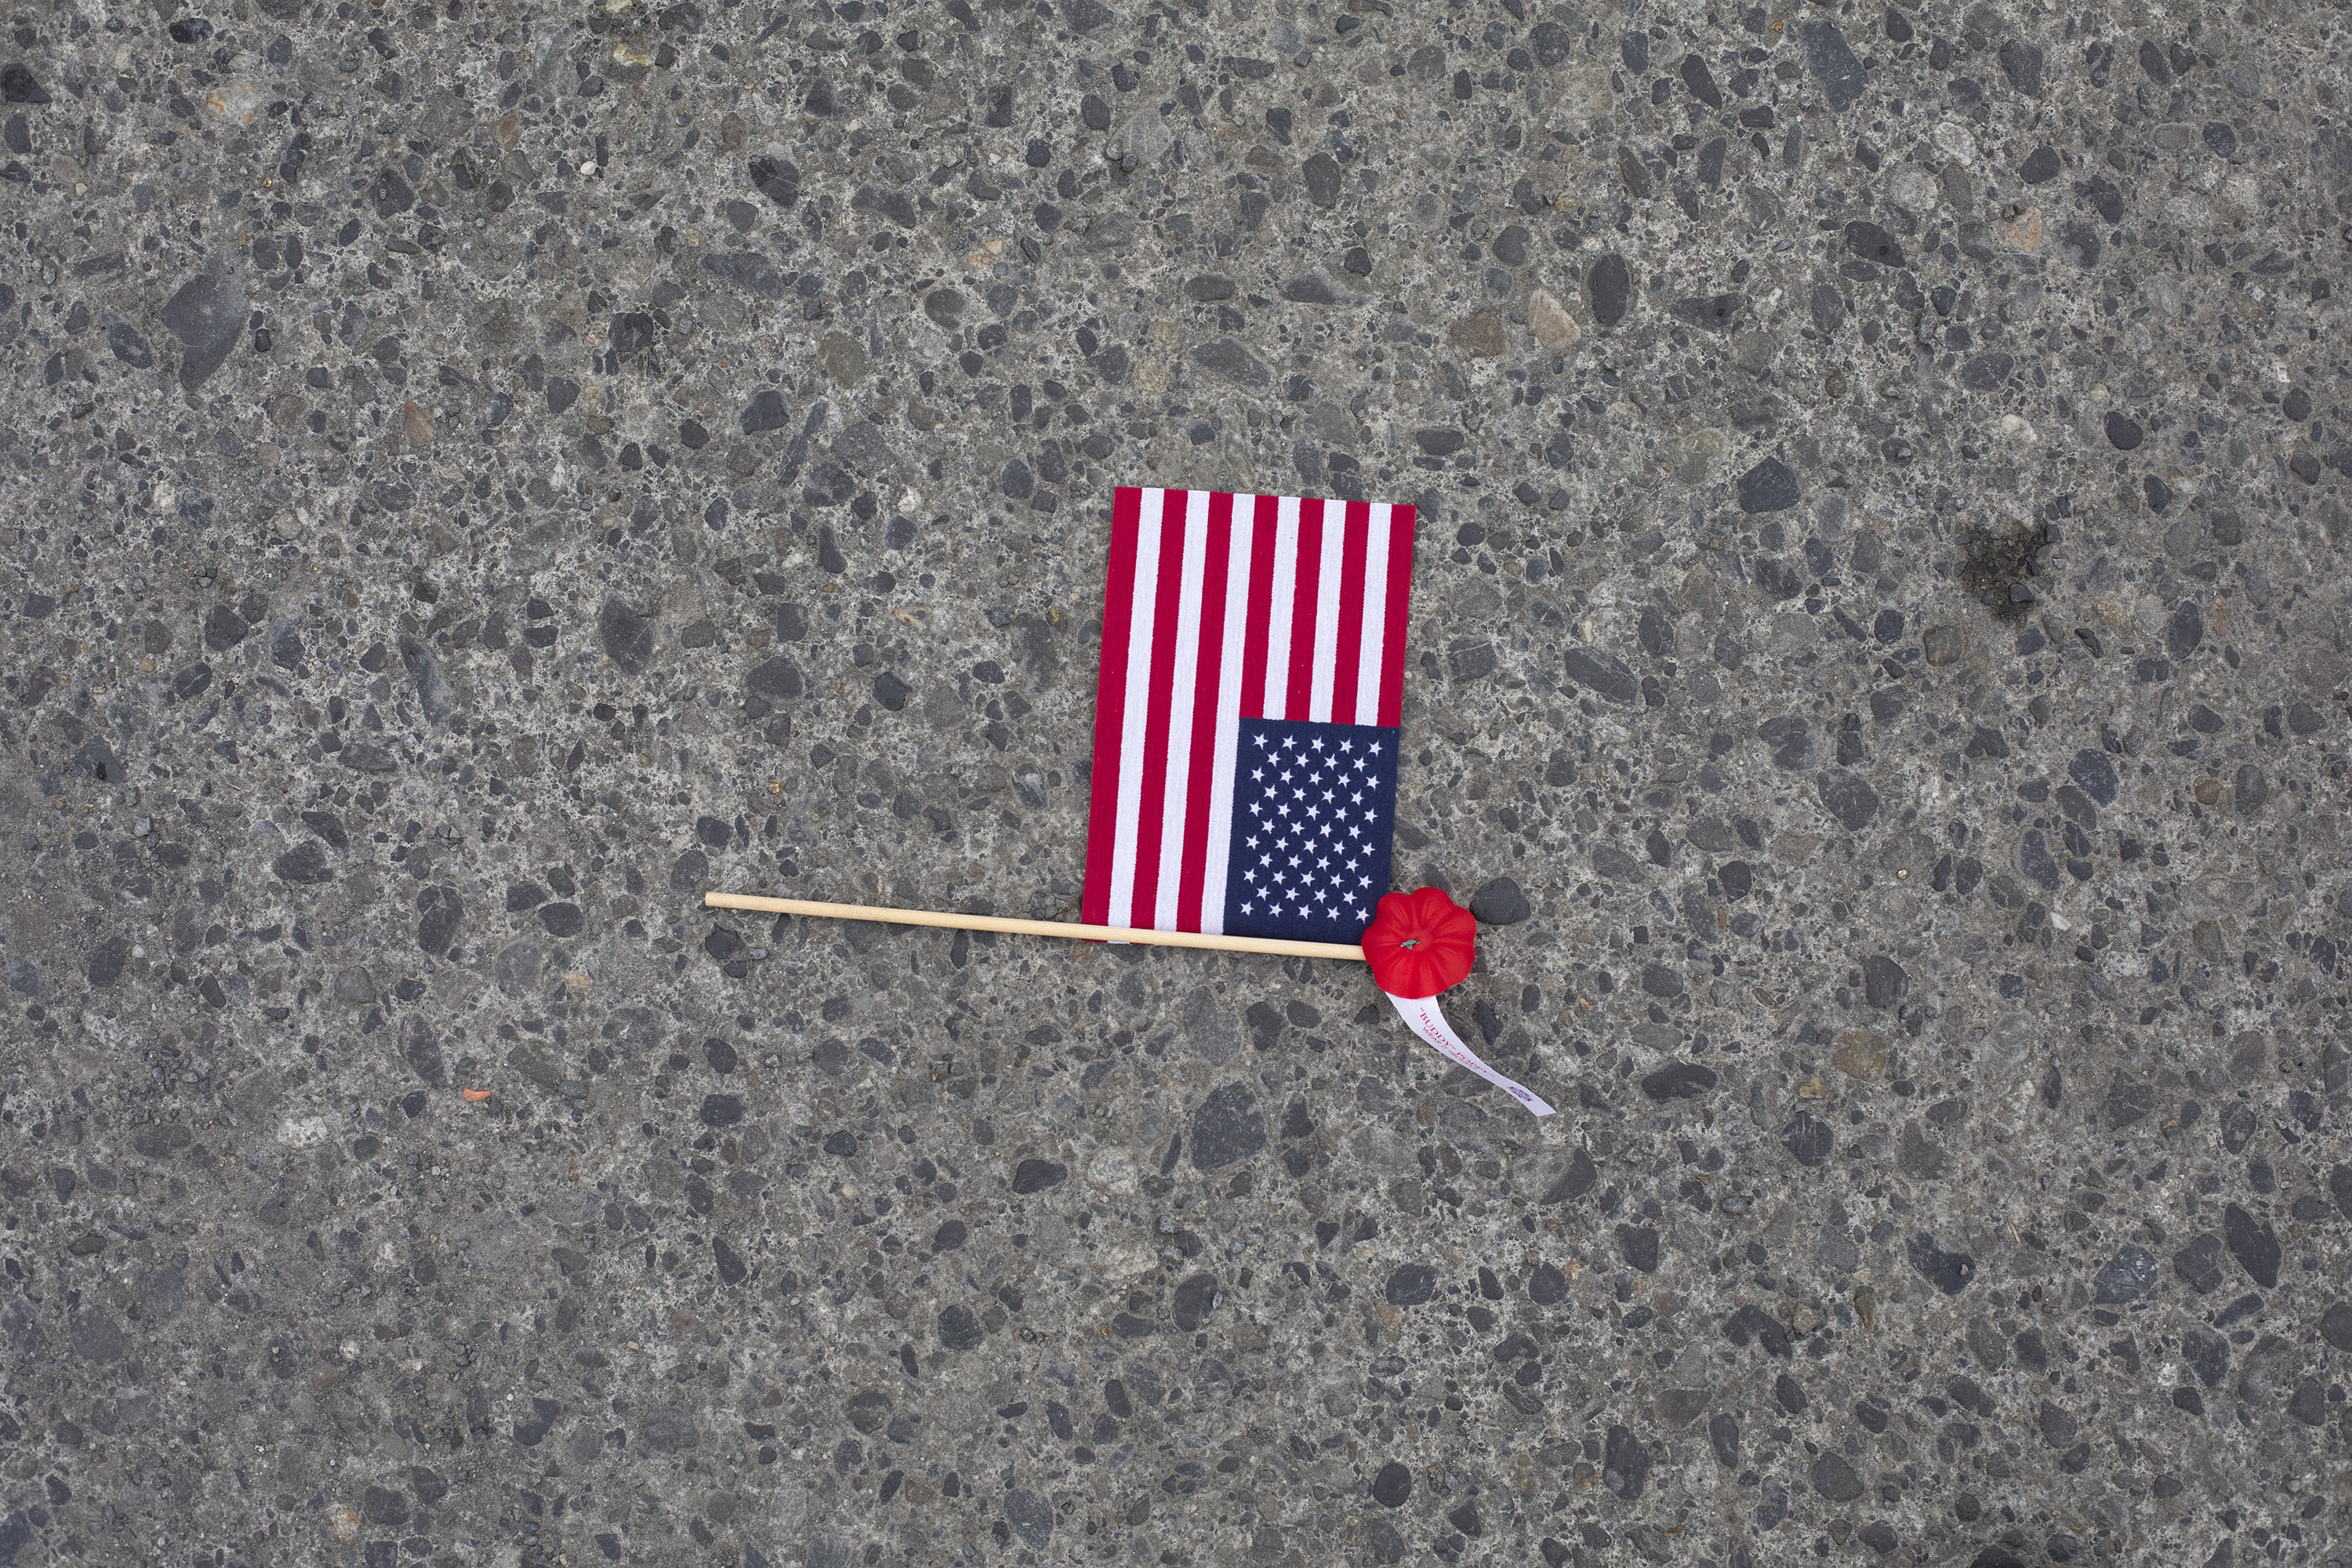 US Waver flag left on ground after 4th of July celebration at downtown Cordova AK